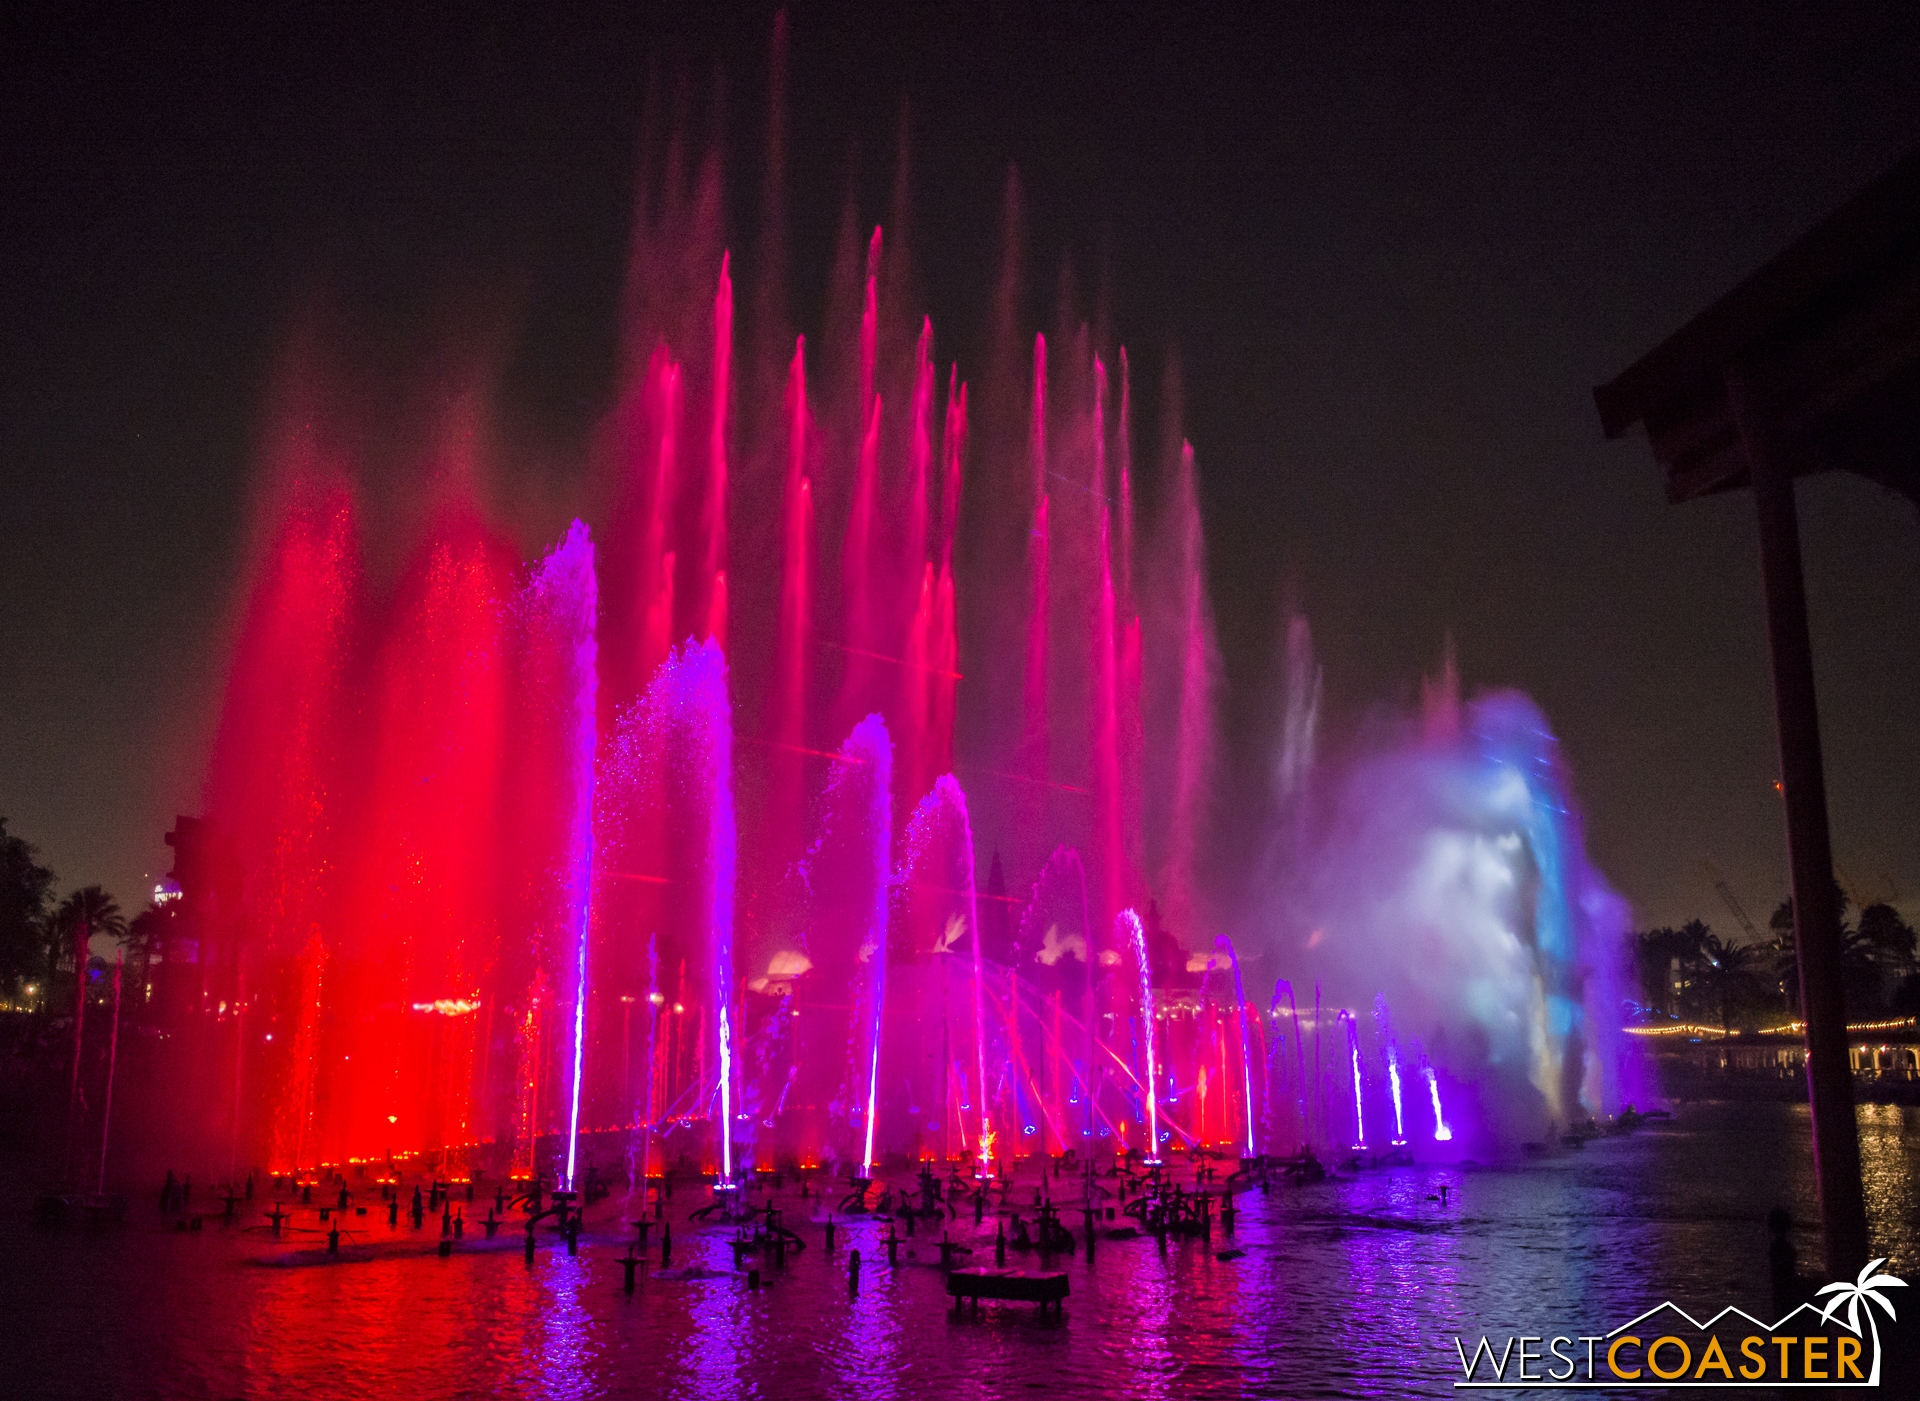  Still, the dancing fountains are mesmerizing here as they are from the front view. 